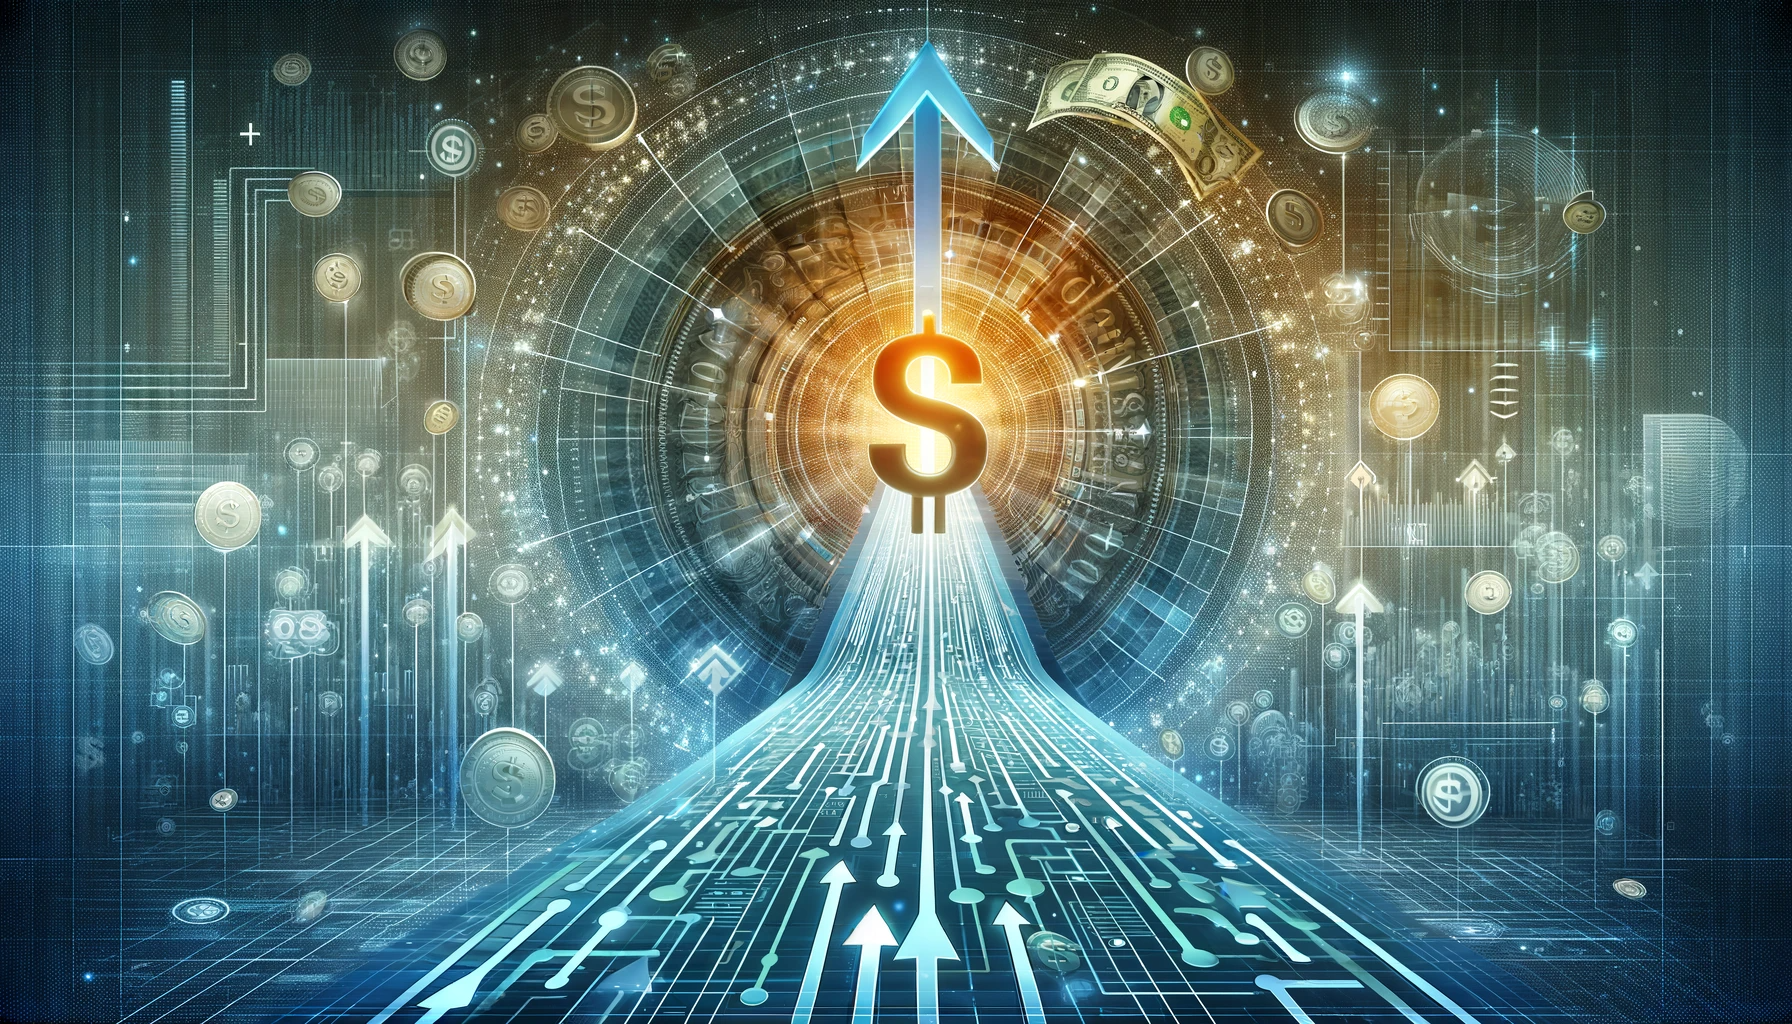 Digital Dollars: Your Gateway to Smart Savings and Financial Growth